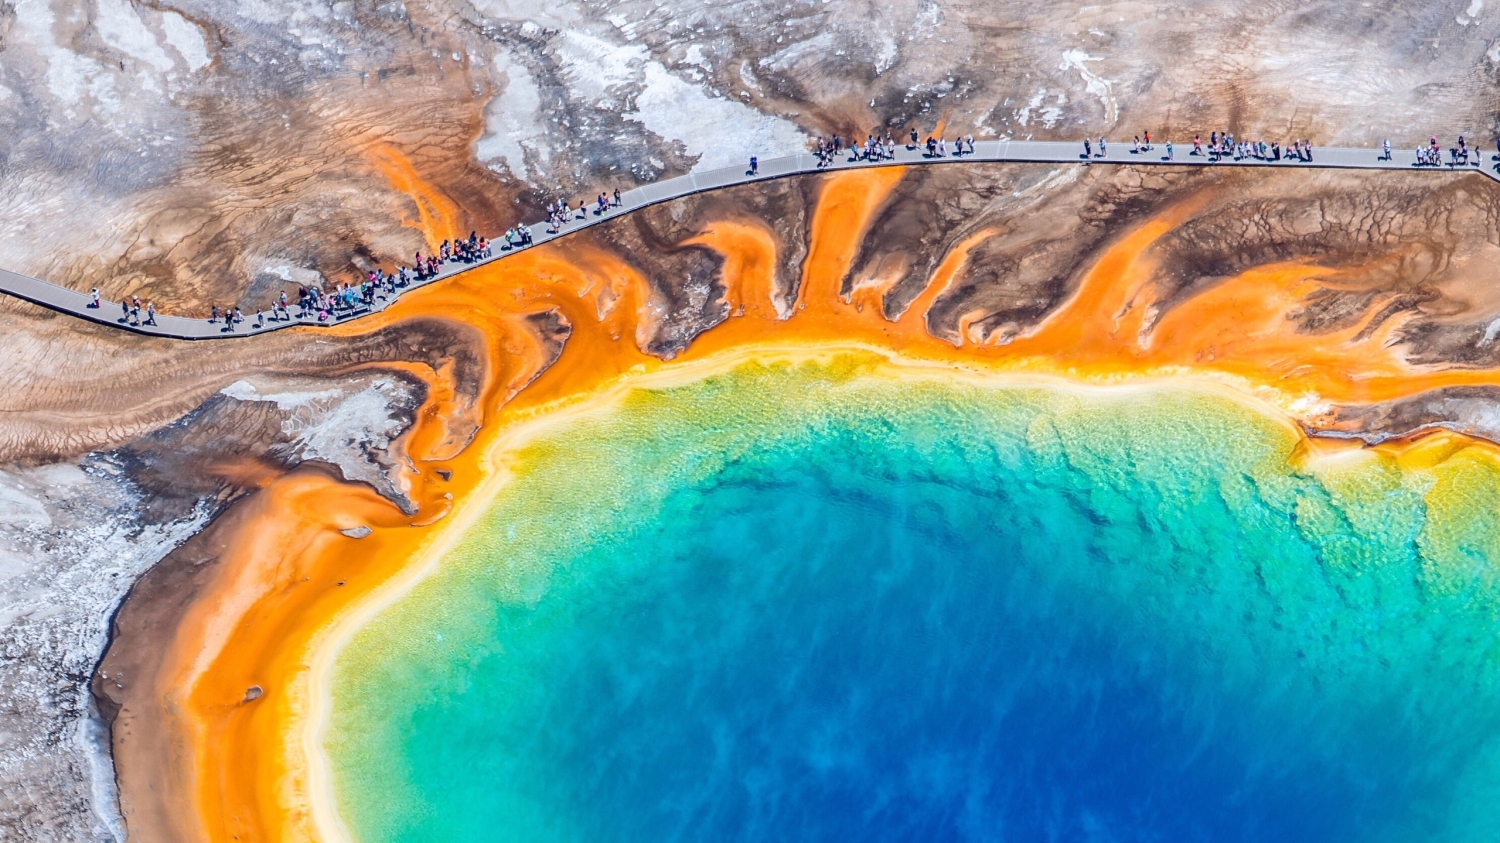 Yellowstone Park is closed and this insane helicopter video shows why